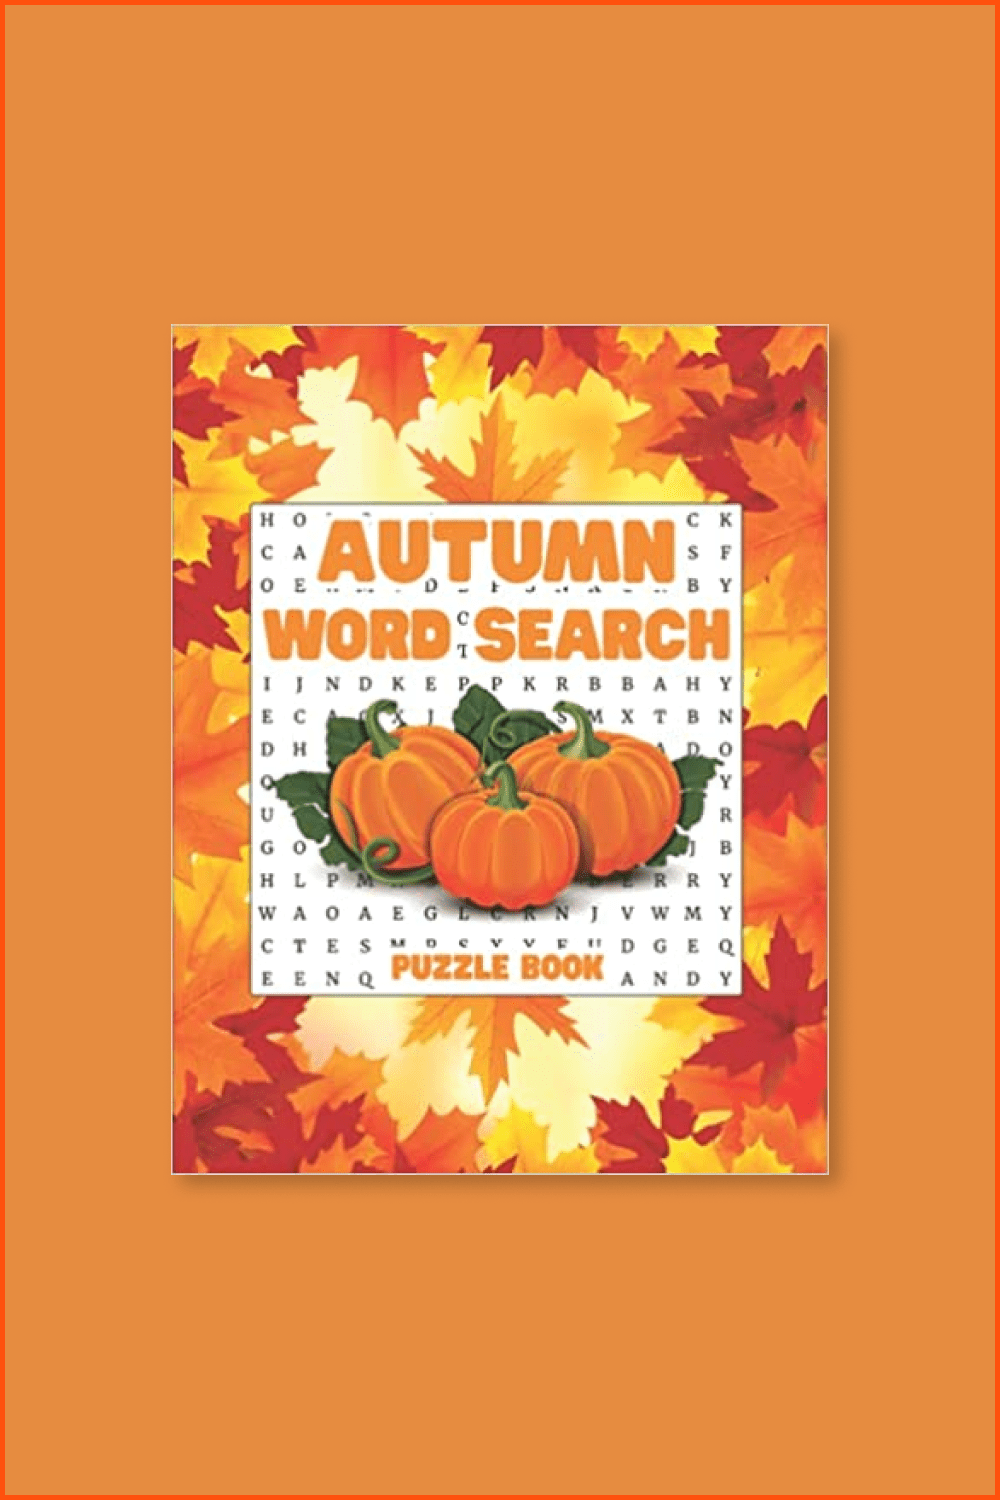 Bright orange book with tikva and yellow leaves on the cover.